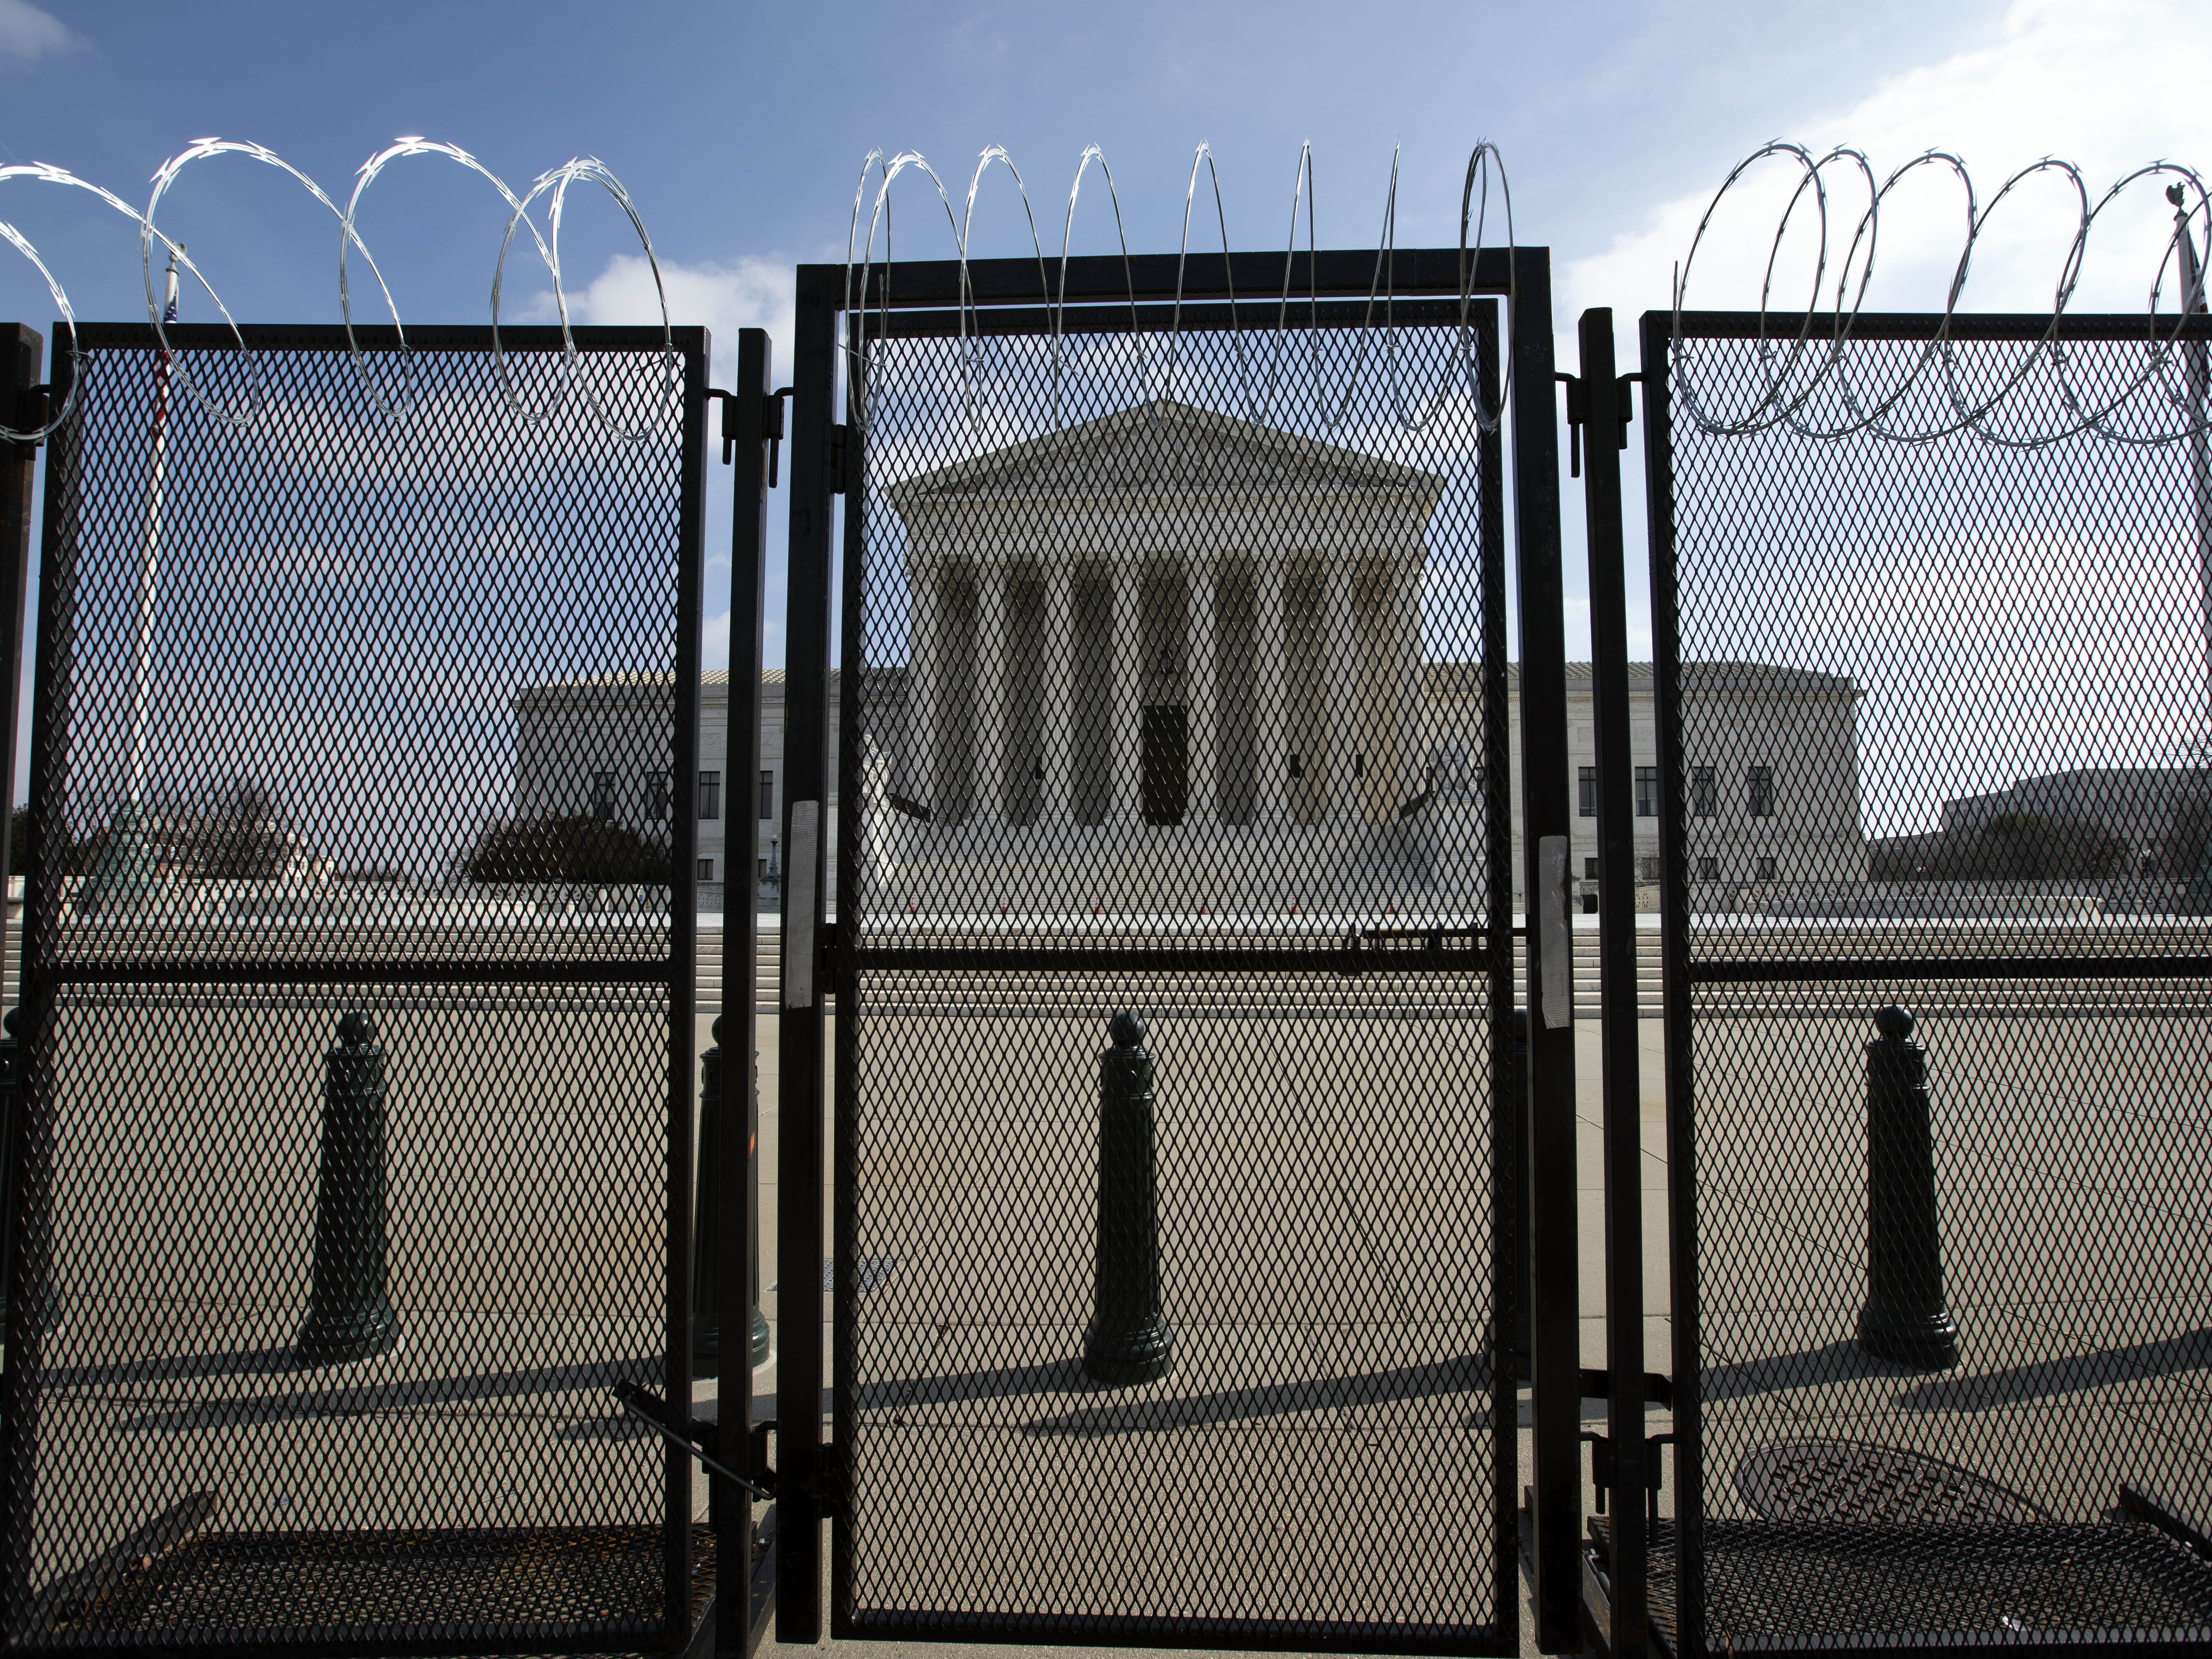 The Supreme Court heard arguments in a case involving an officer who pursued a misdemeanor suspect into his home without a warrant. CREDIT: Jose Luis Magana/AP